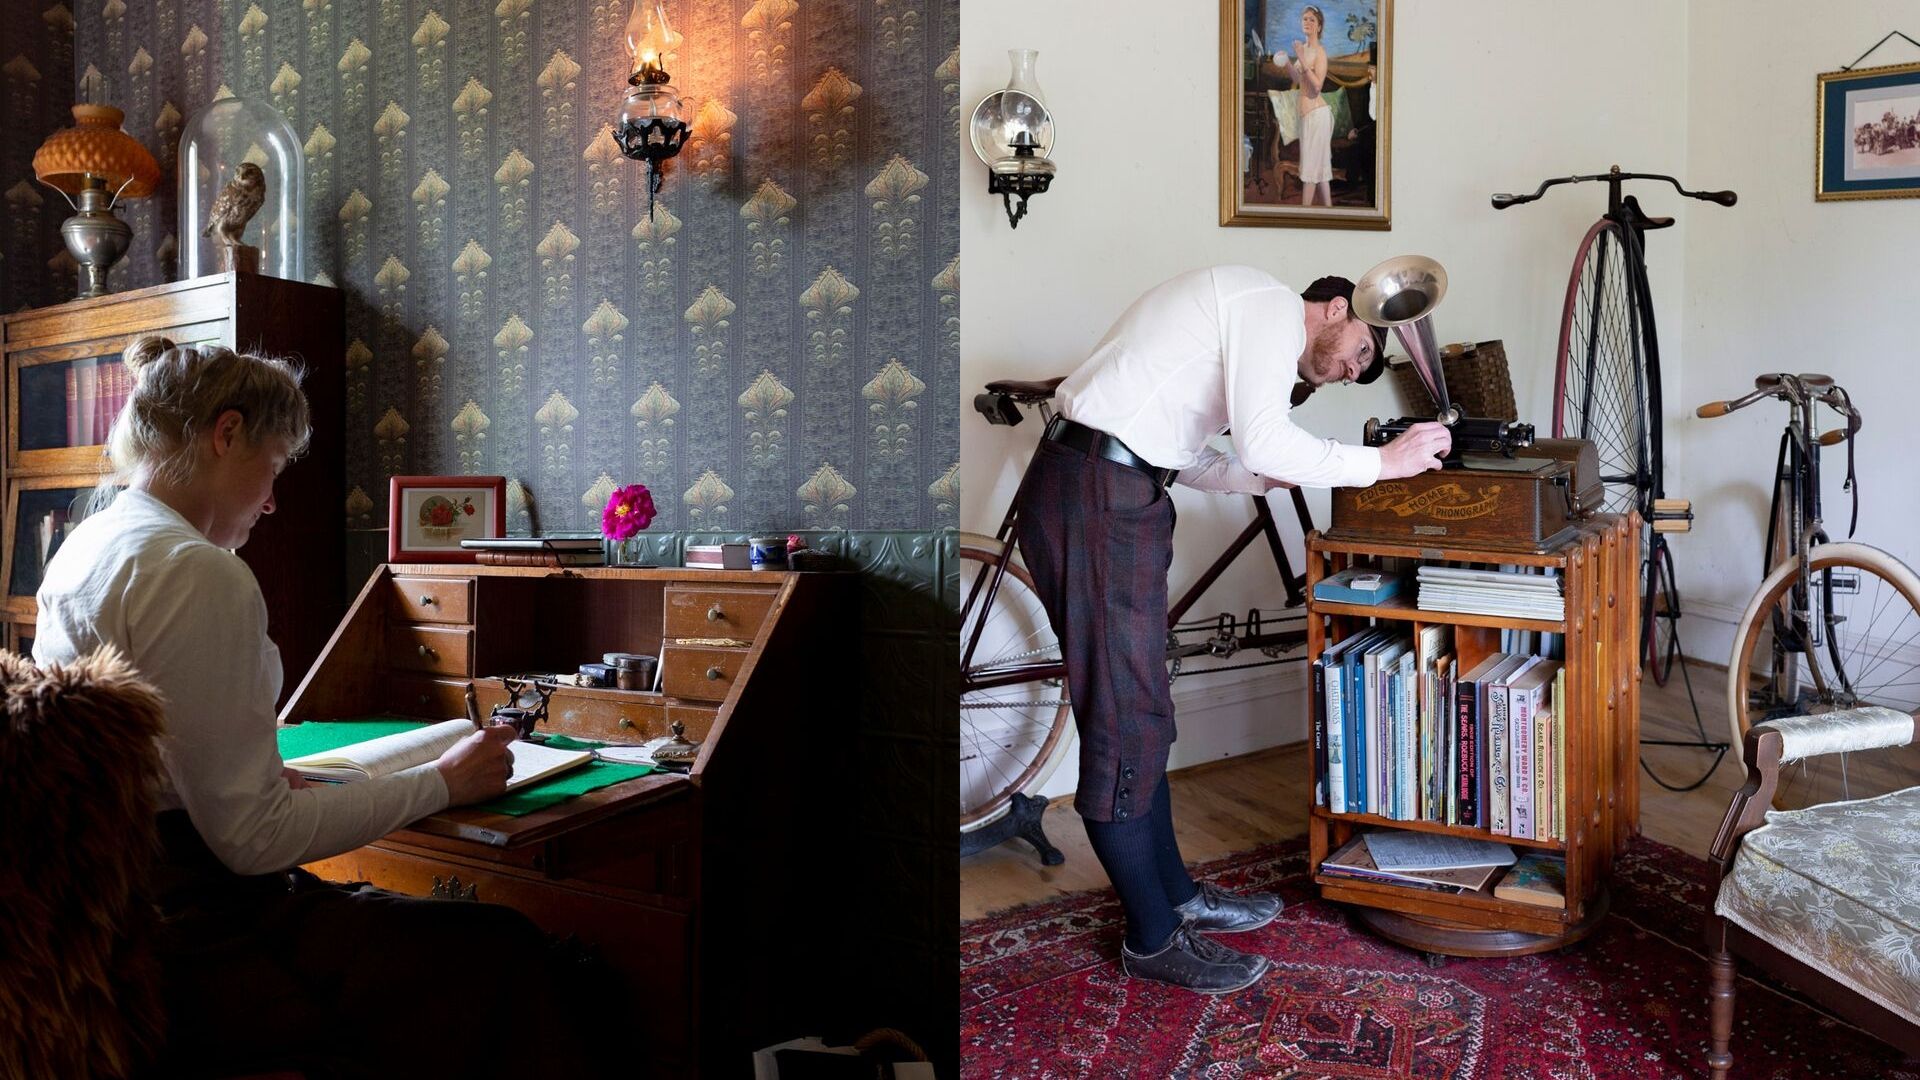 At left, sitting at a desk writing by hand; at right, fixing a phonograph